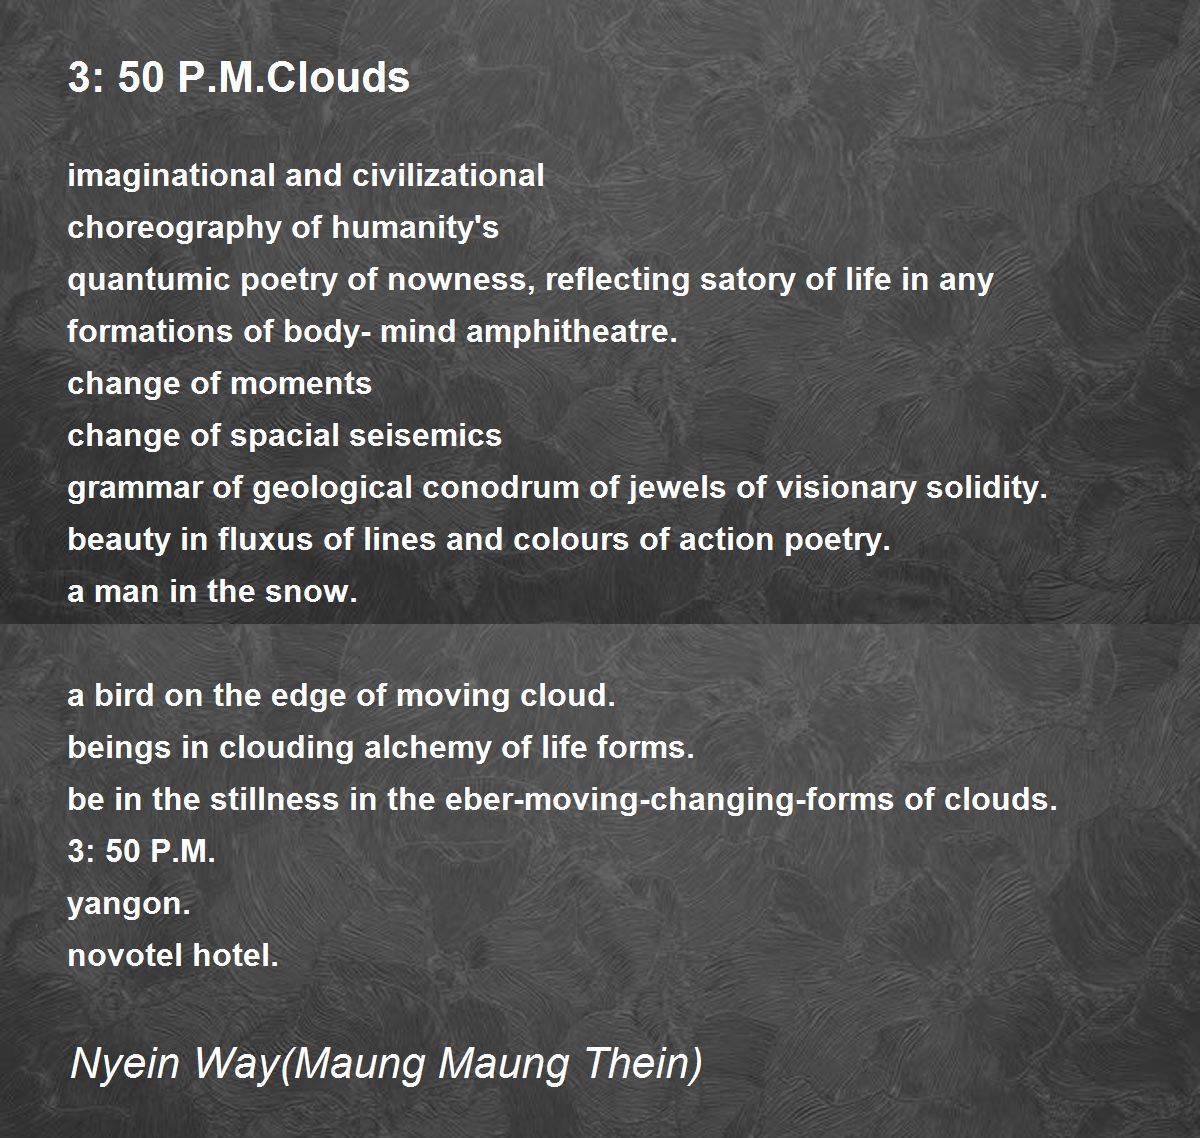 3: 50 P.M.Clouds - 3: 50 P.M.Clouds Poem by Nyein Way(Maung Maung